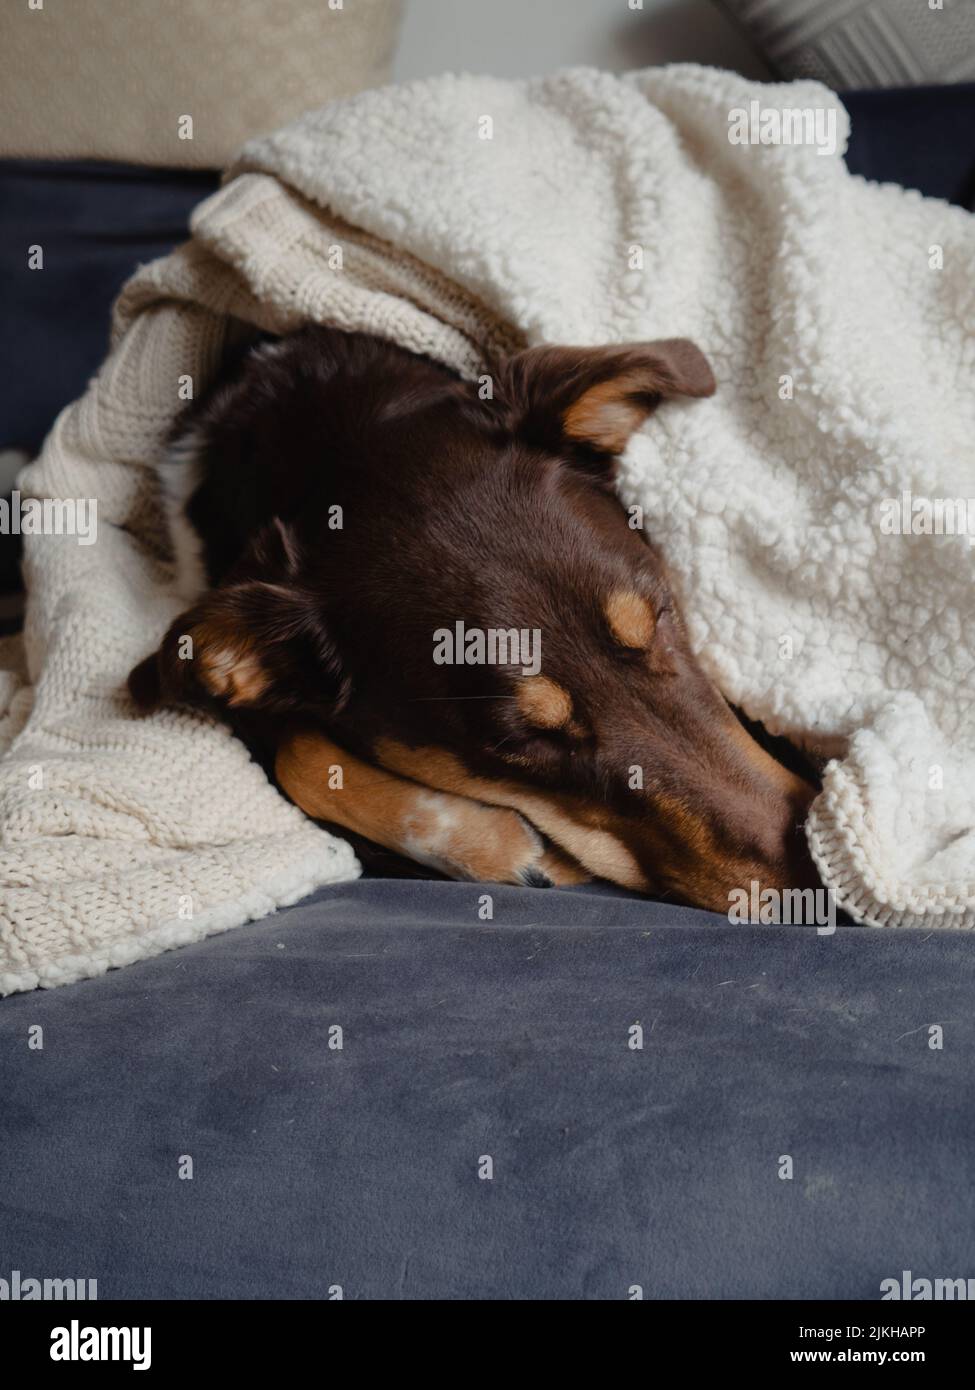 A vertical shot of a cute dog sleeping on a sofa wrapped in a blanket Stock Photo